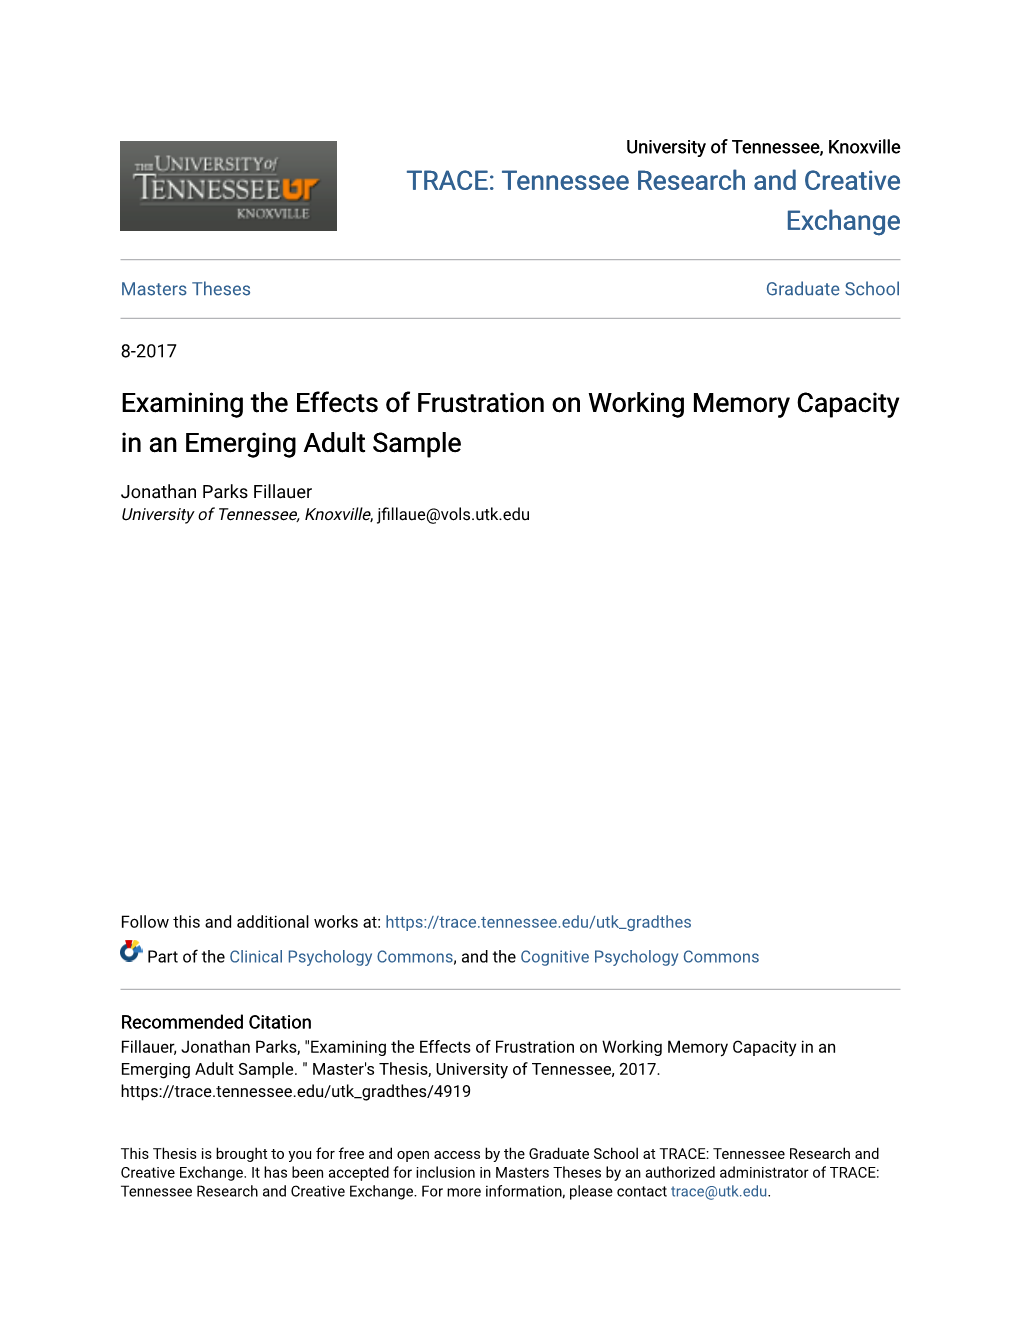 Examining the Effects of Frustration on Working Memory Capacity in an Emerging Adult Sample